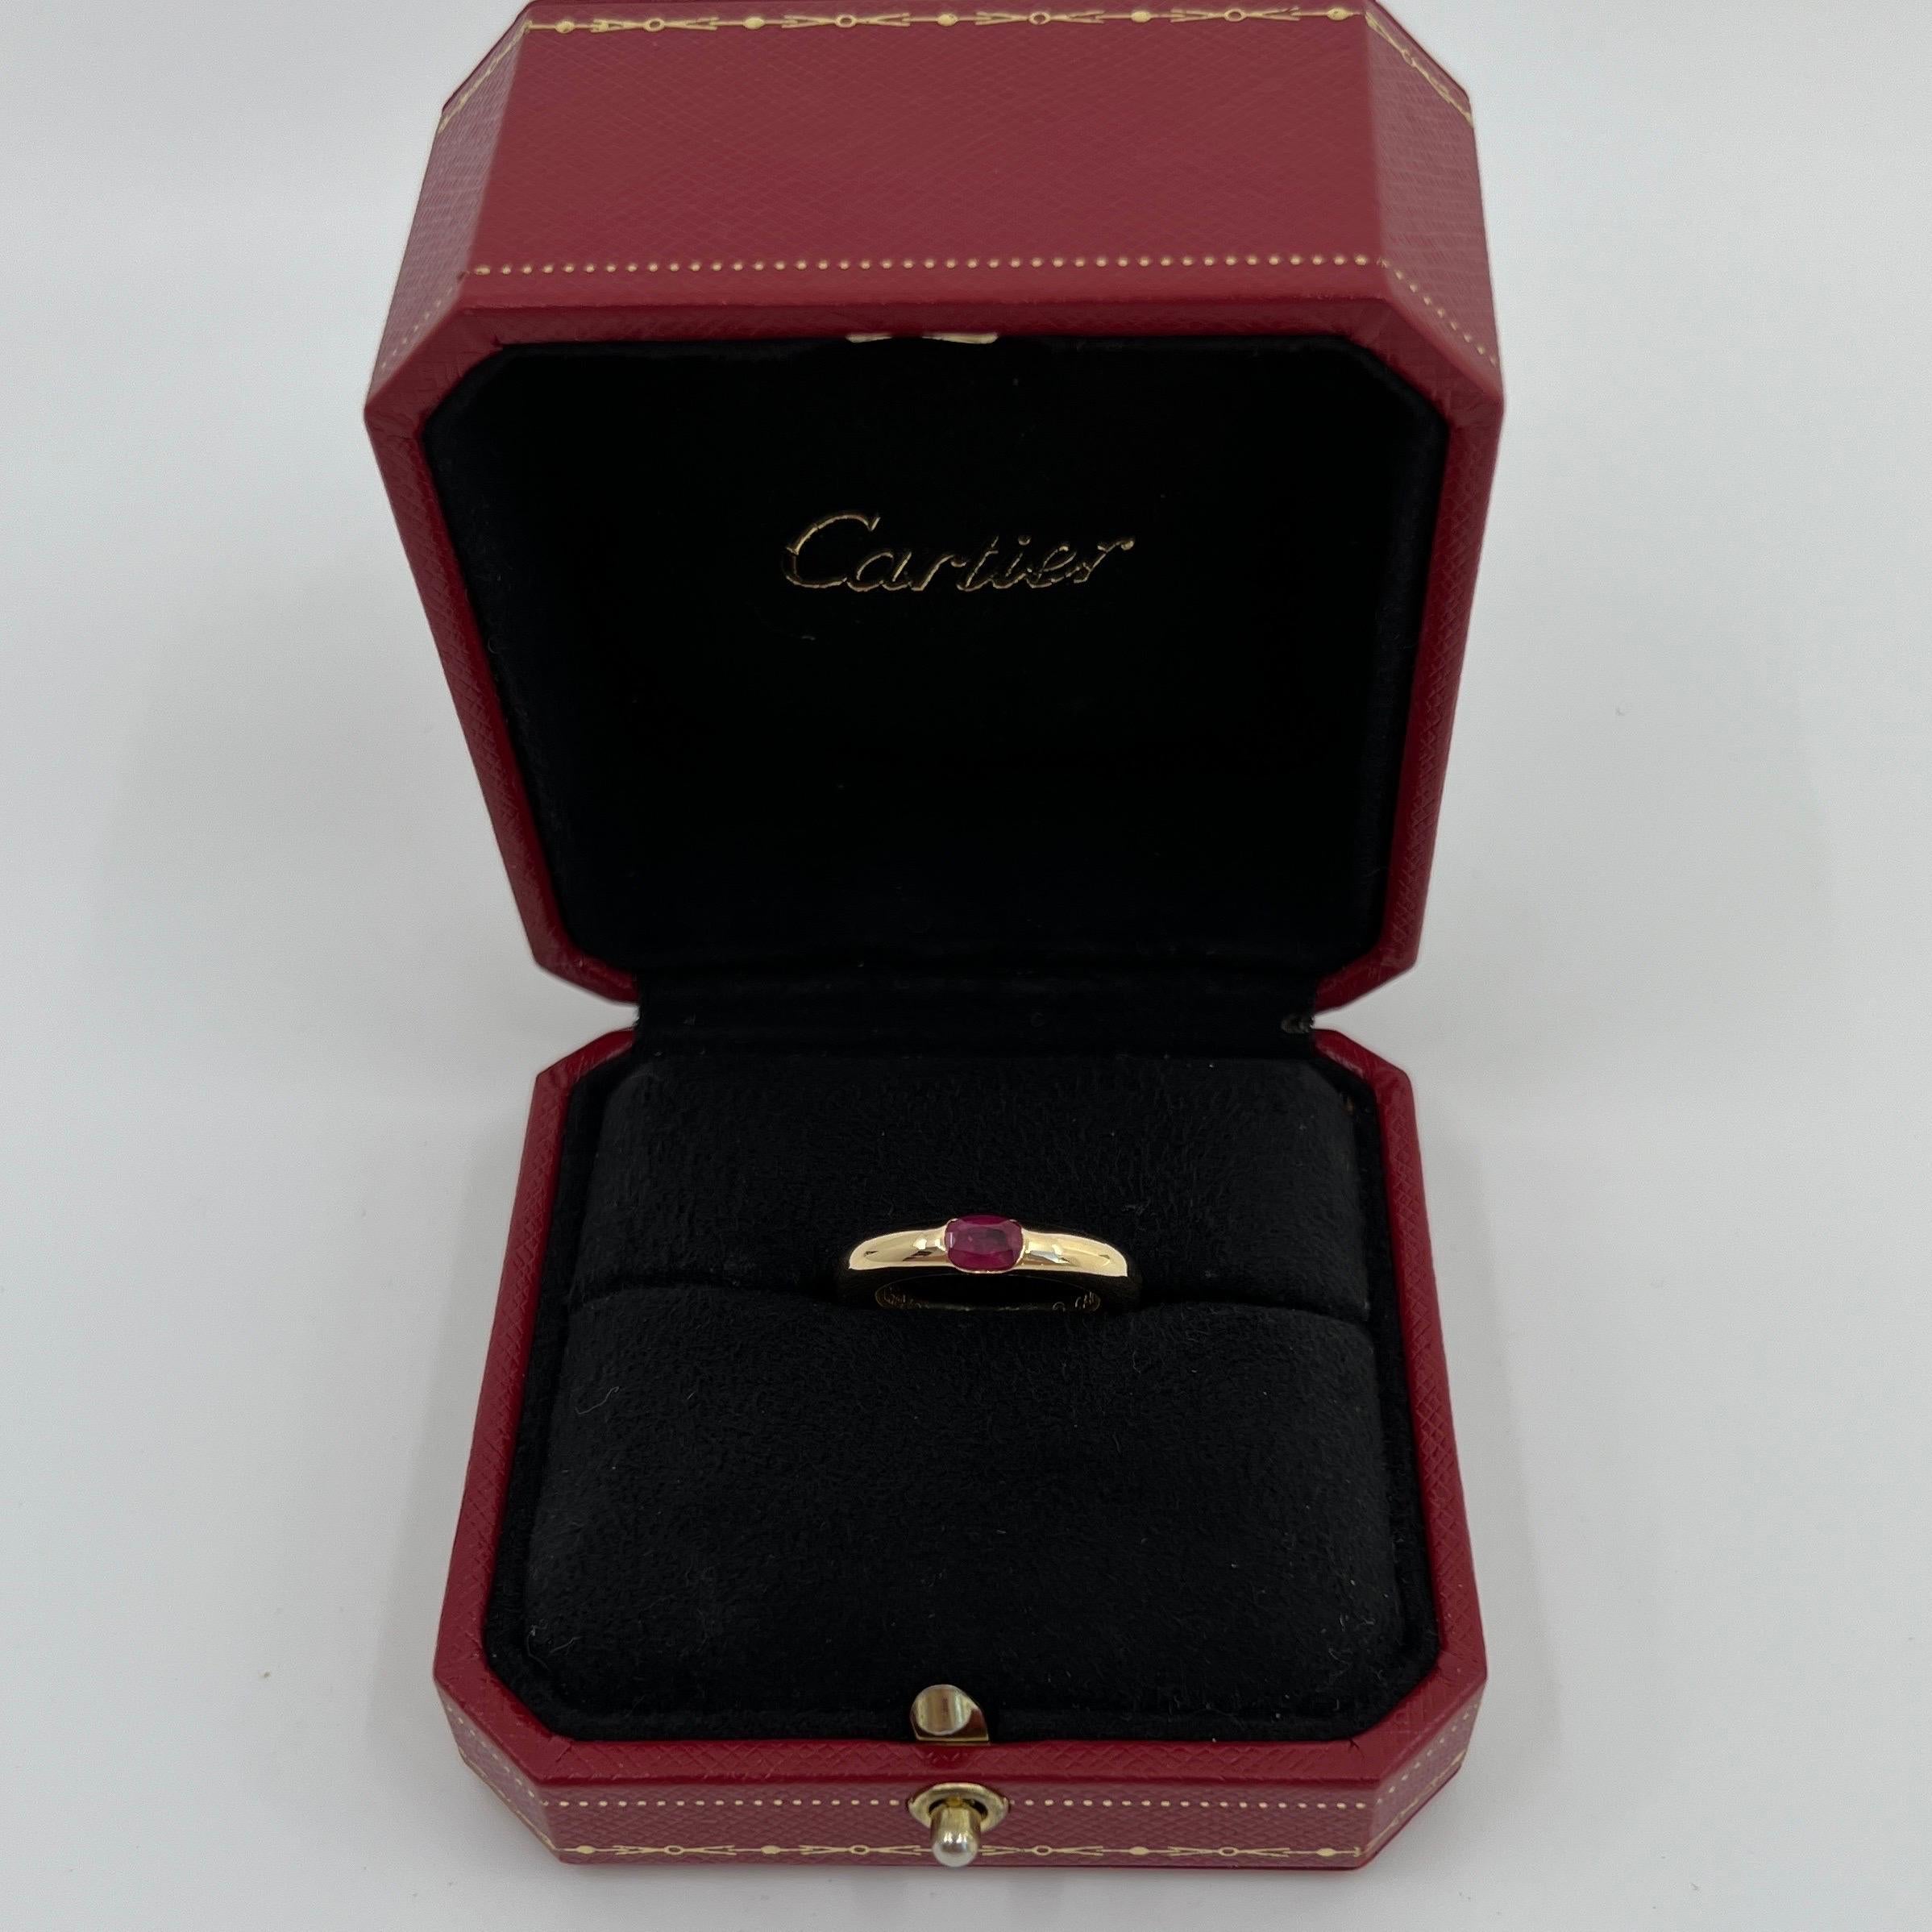 Vintage Cartier Deep Red Ruby 18k Yellow Gold Solitaire Ring.

Stunning yellow gold ring set with a fine deep red ruby. Fine jewellery houses like Cartier only use the finest of gemstones and this ruby is no exception. An excellent quality ruby with